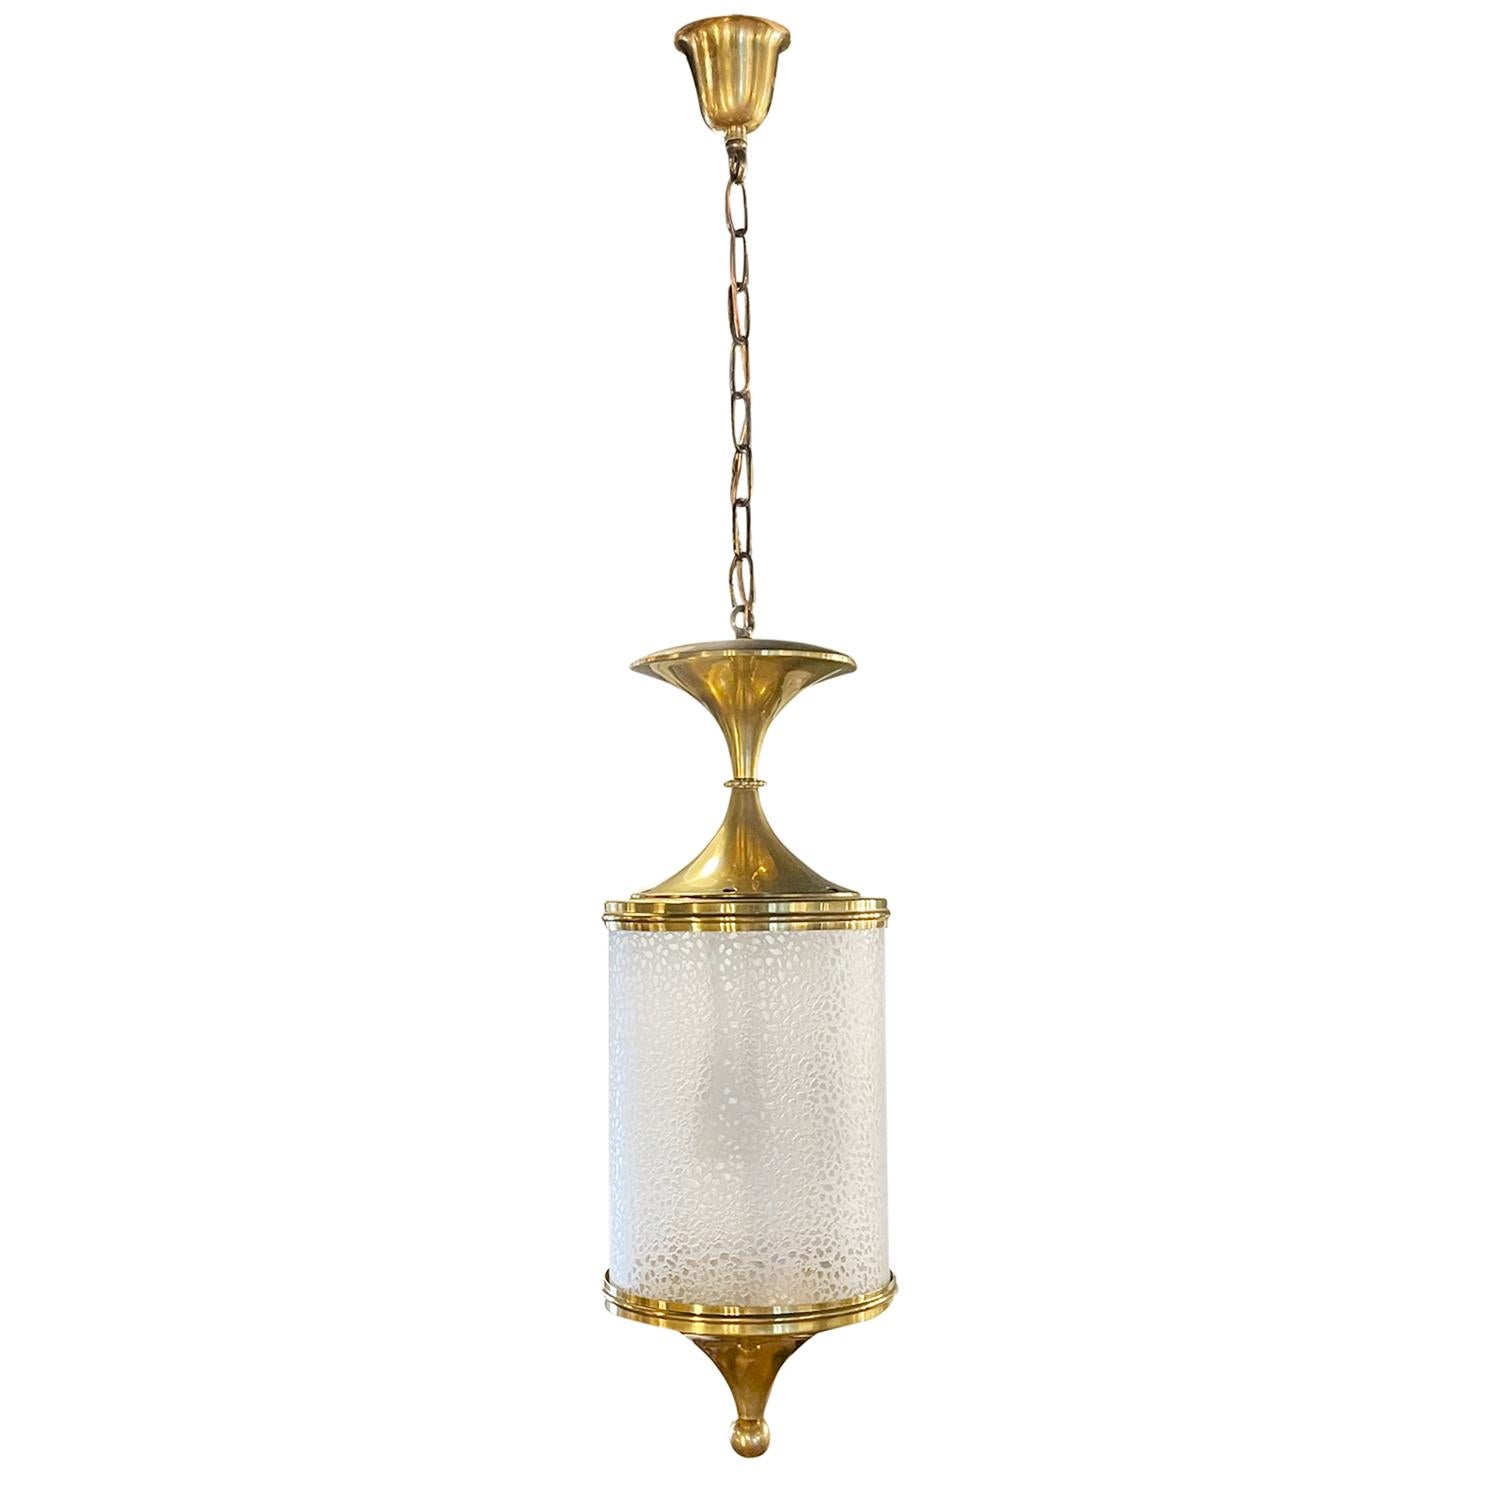 A vintage Art Deco Italian chandelier made of handcrafted brass and hand blown smoked crystal glass, designed by Pietro Chiesa and produced by FontanaArte, in good condition. The hanging ceiling pendant is featuring a three light socket. The wires